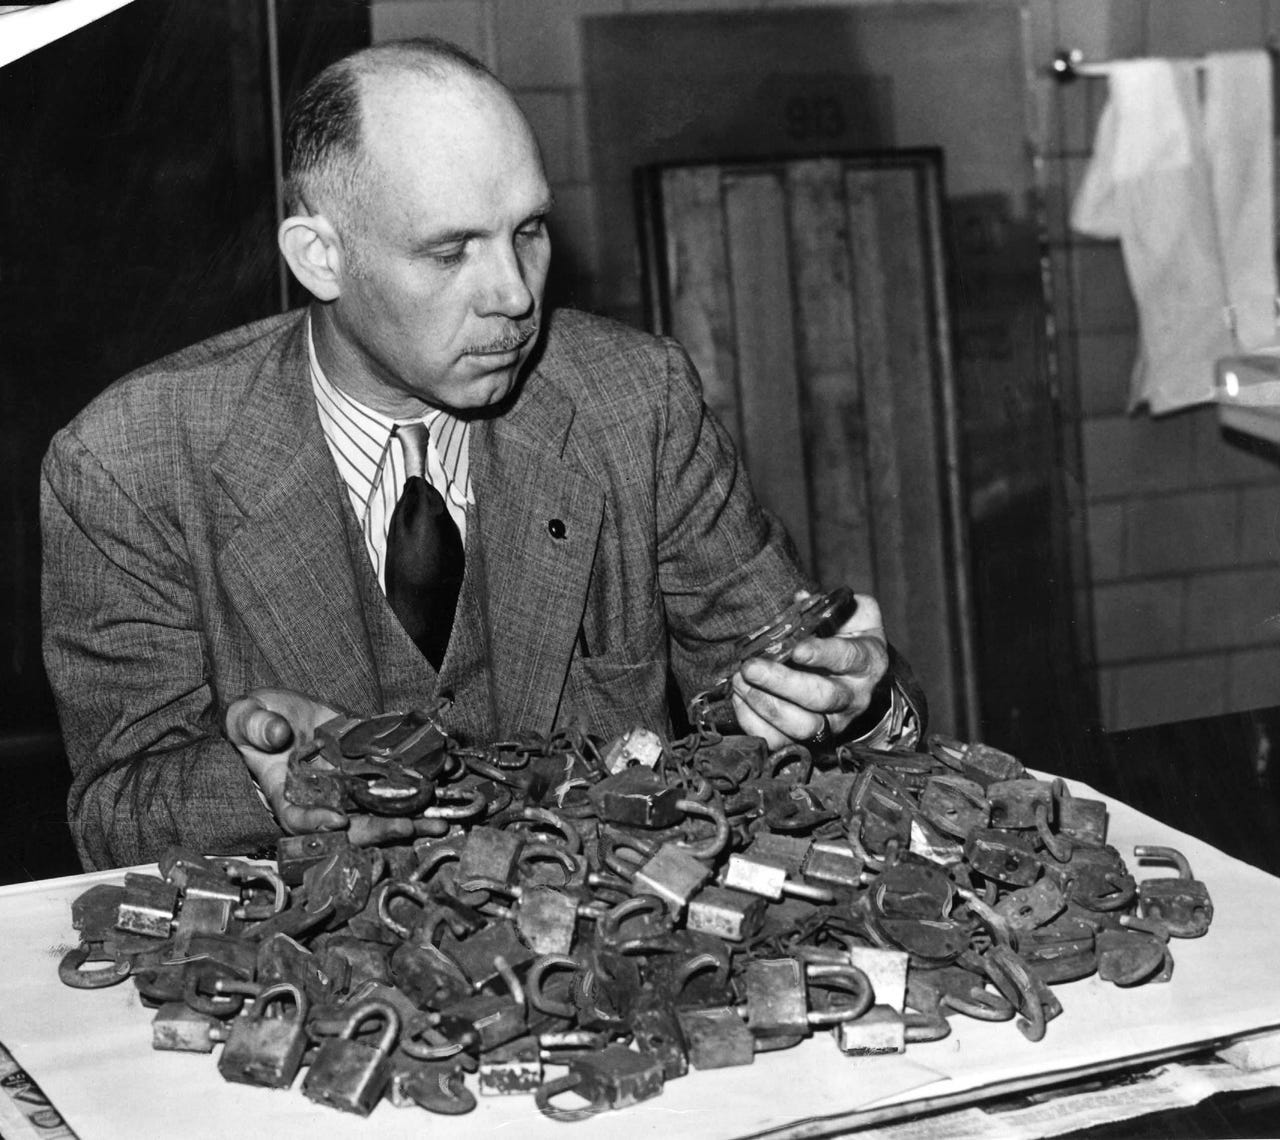 Wilbert C. Garred, assistant custodian of the Federal Building in Detroit, inspects old metal padlocks to be turned in for scrap during the war effort Oct. 6, 1942.